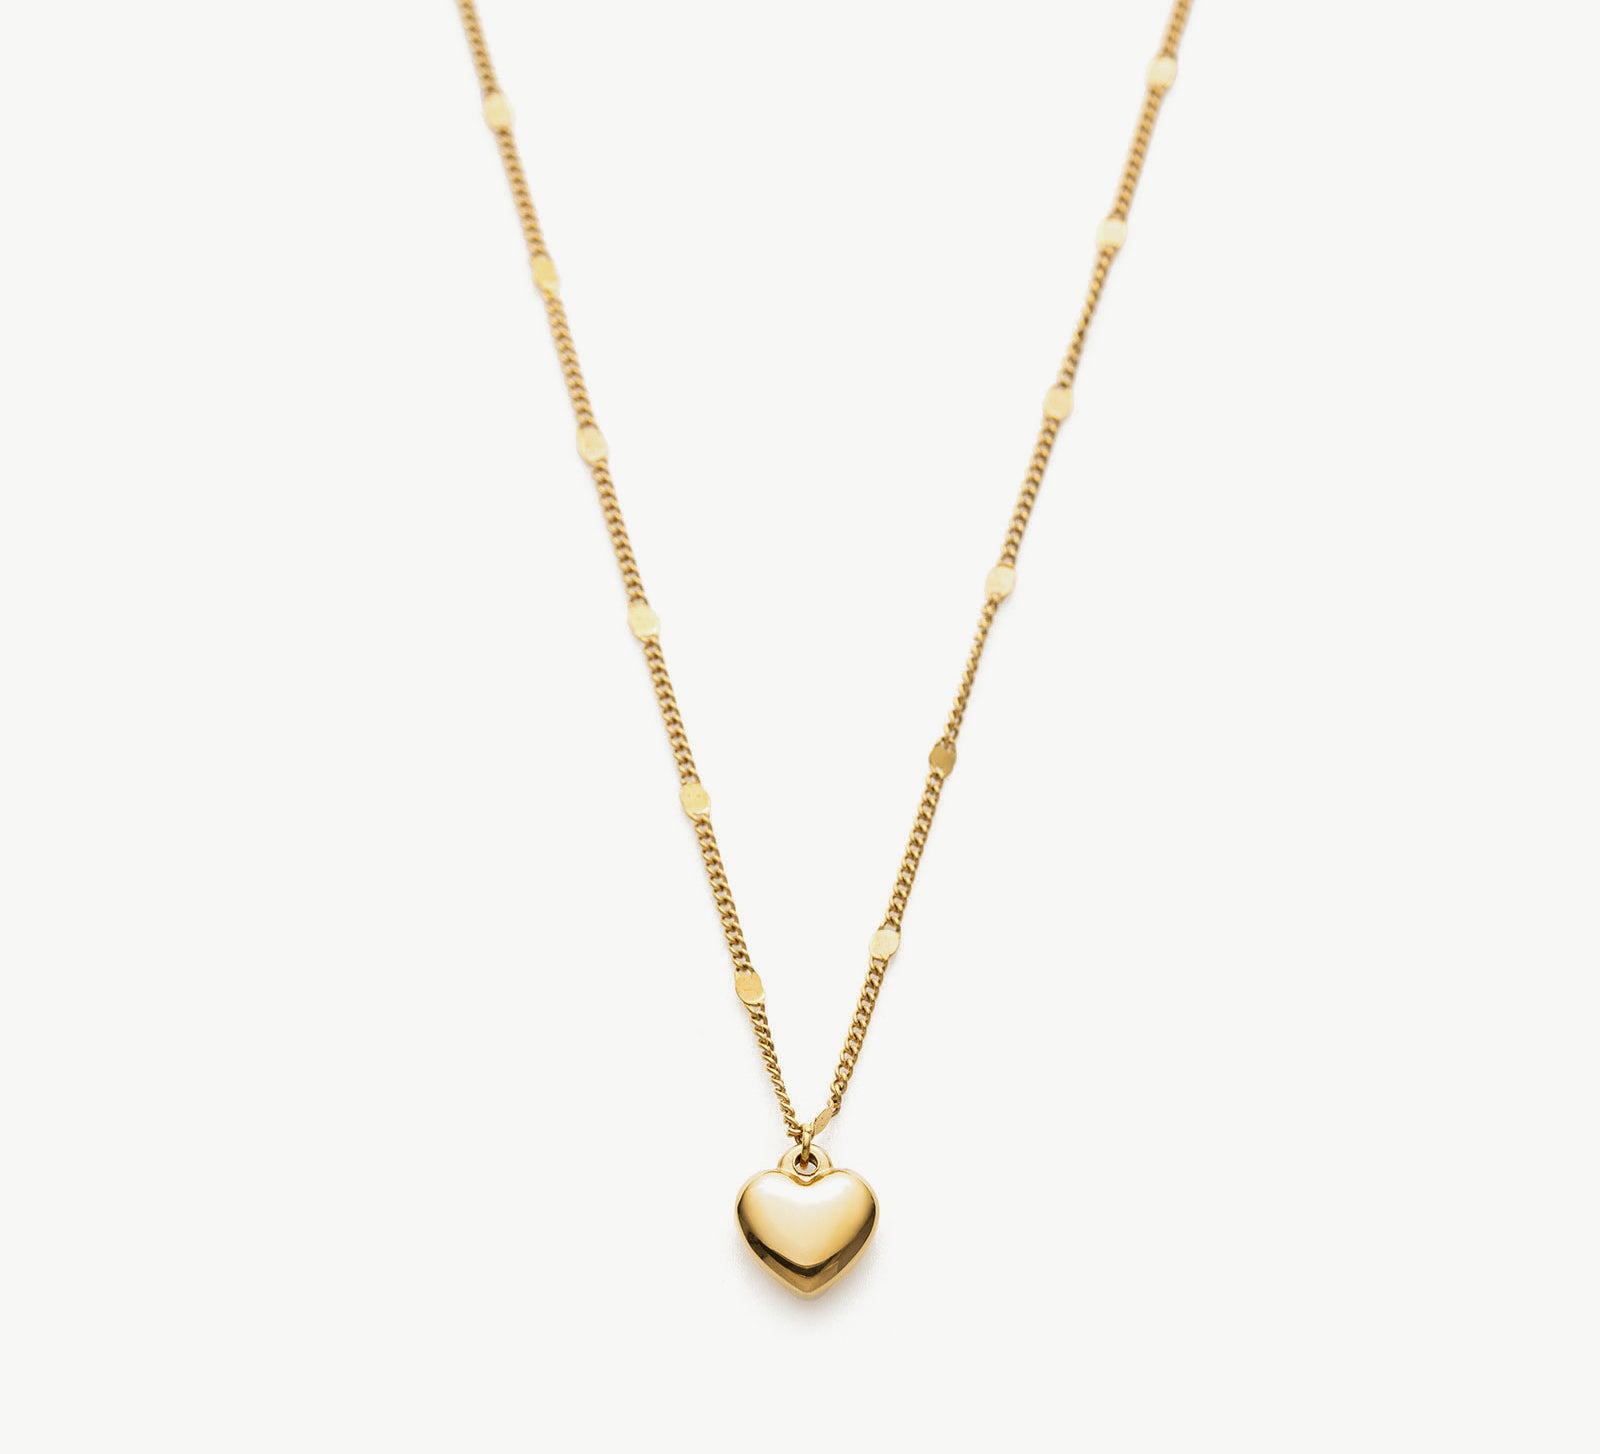 Heart Pendant Necklace in Gold, a timeless piece showcasing a heart-shaped pendant in radiant gold, adding a touch of elegance and sophistication to your neckline